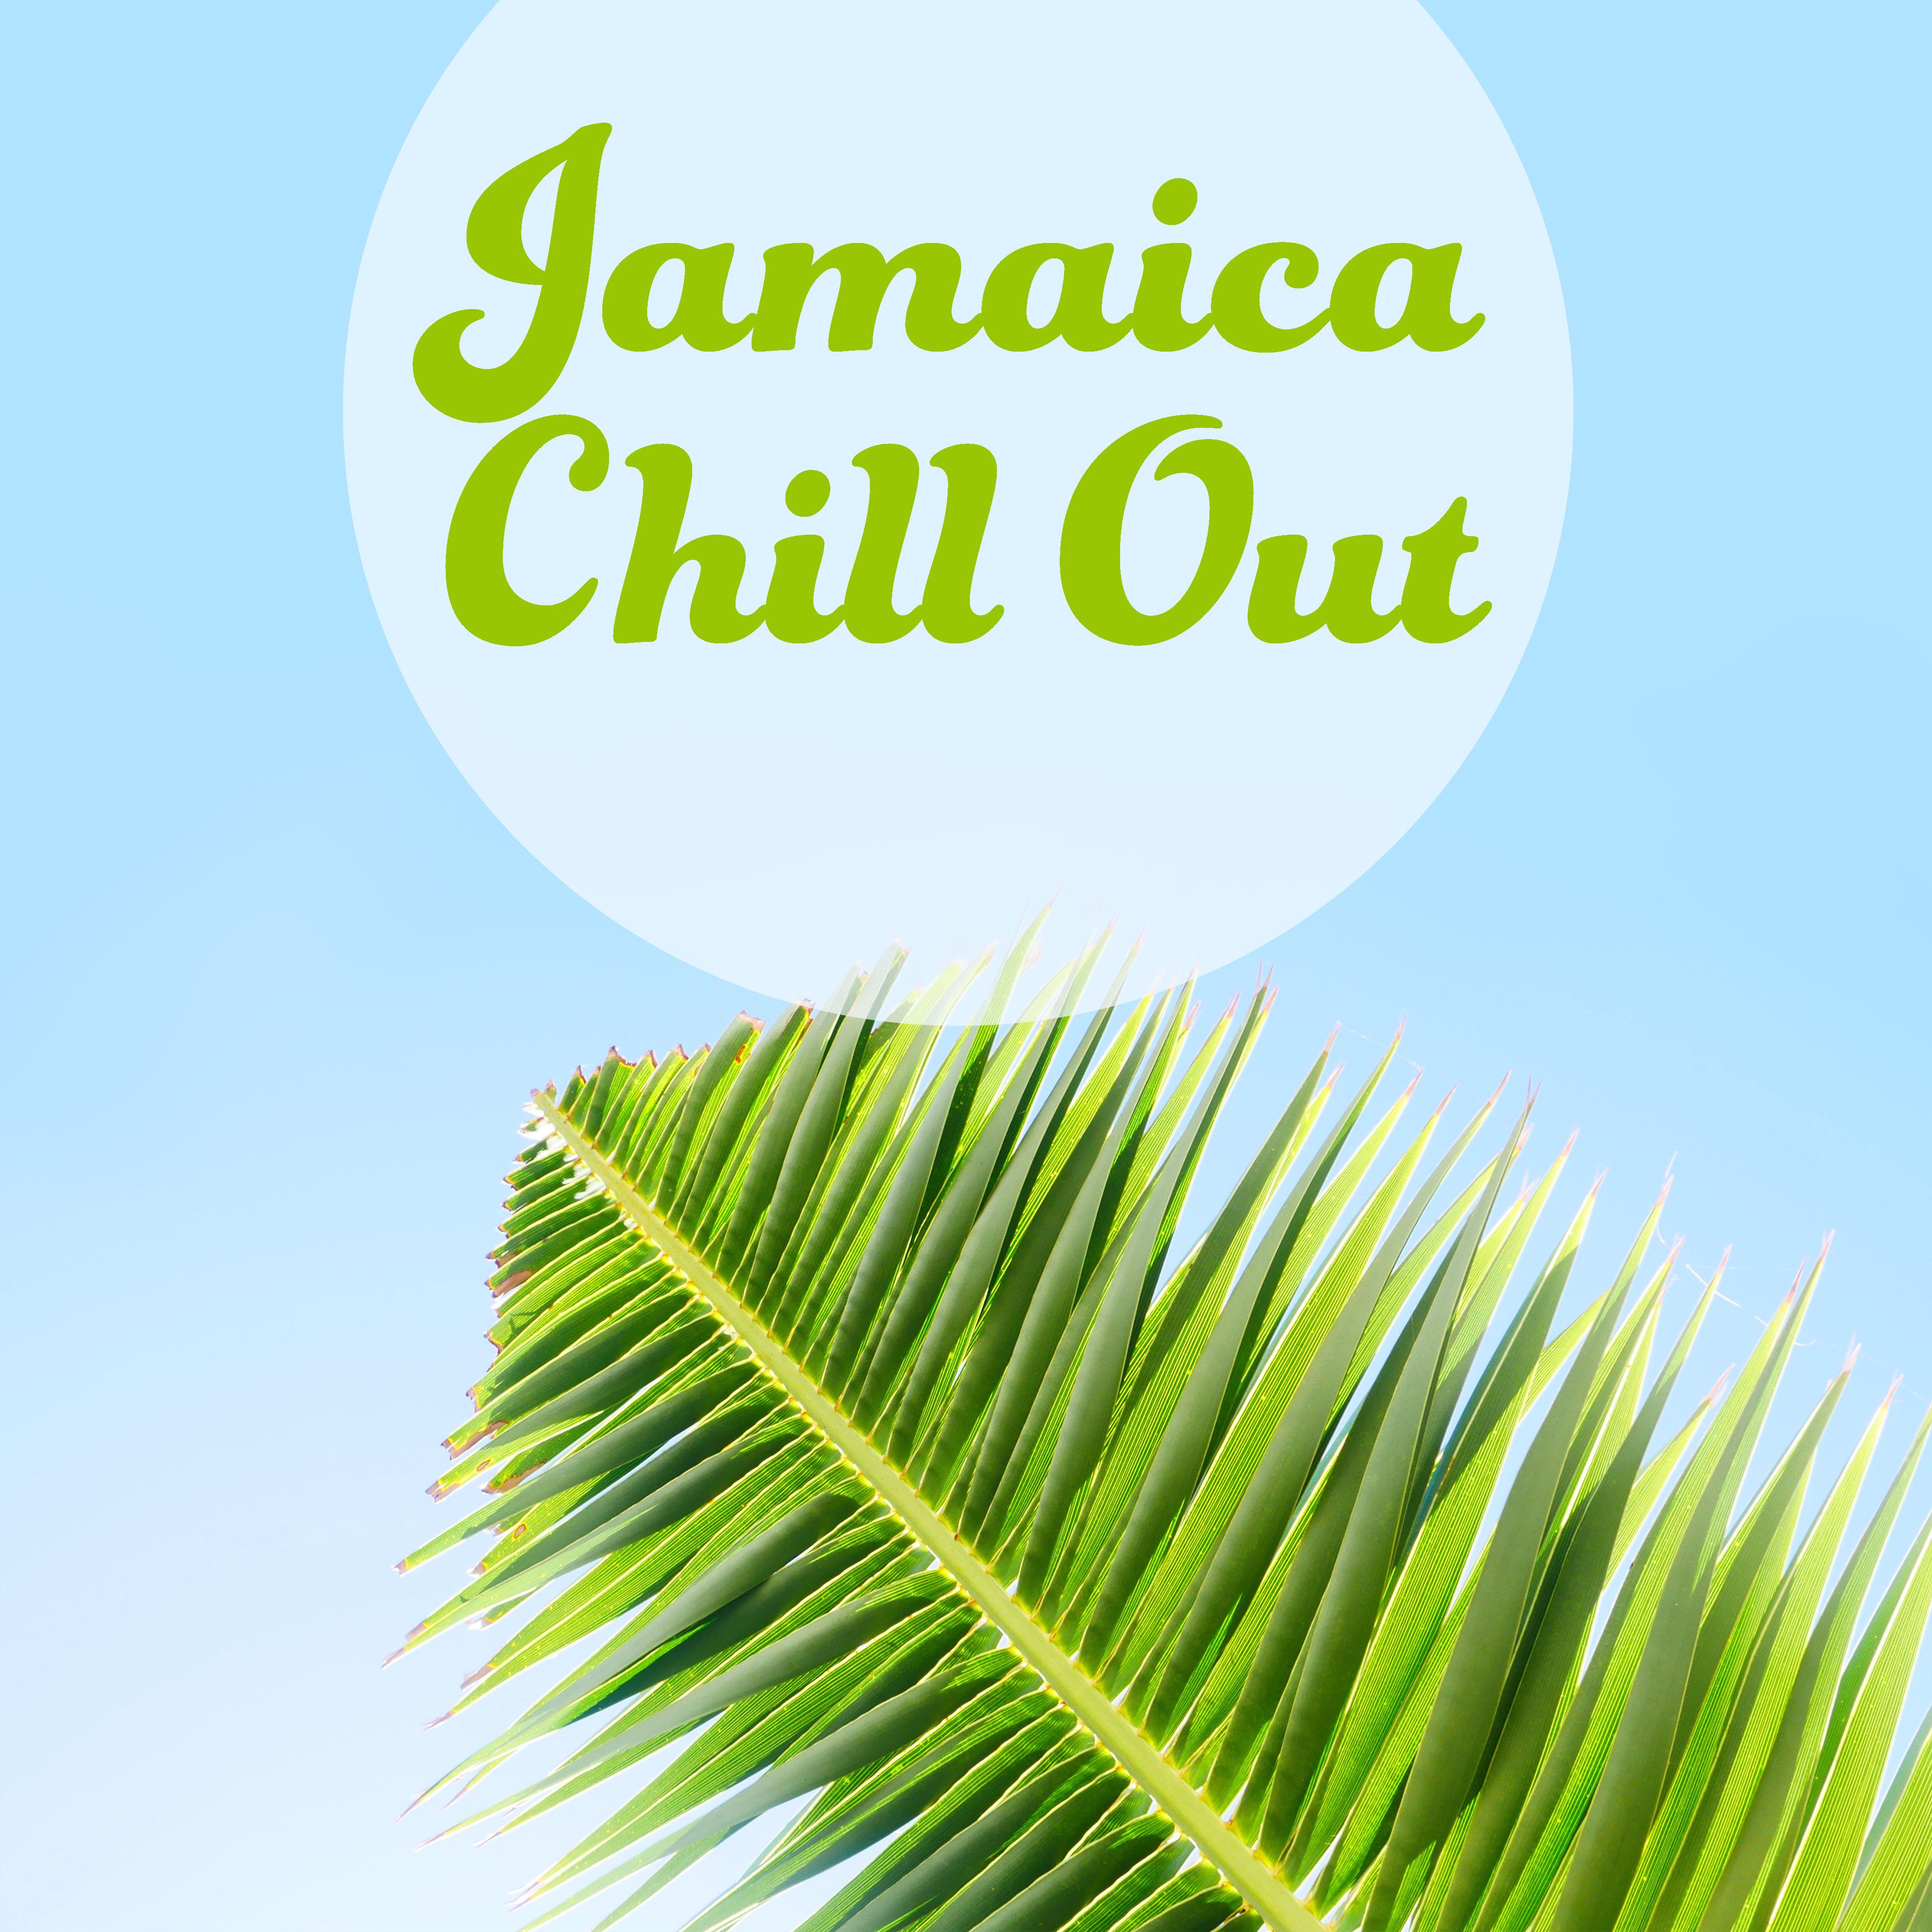 Jamaica Chill Out – Summer Chill Out Music, Rest, Tropical Sounds, Summer Hits 2017, Deep Sun, Relax, Beach Chill